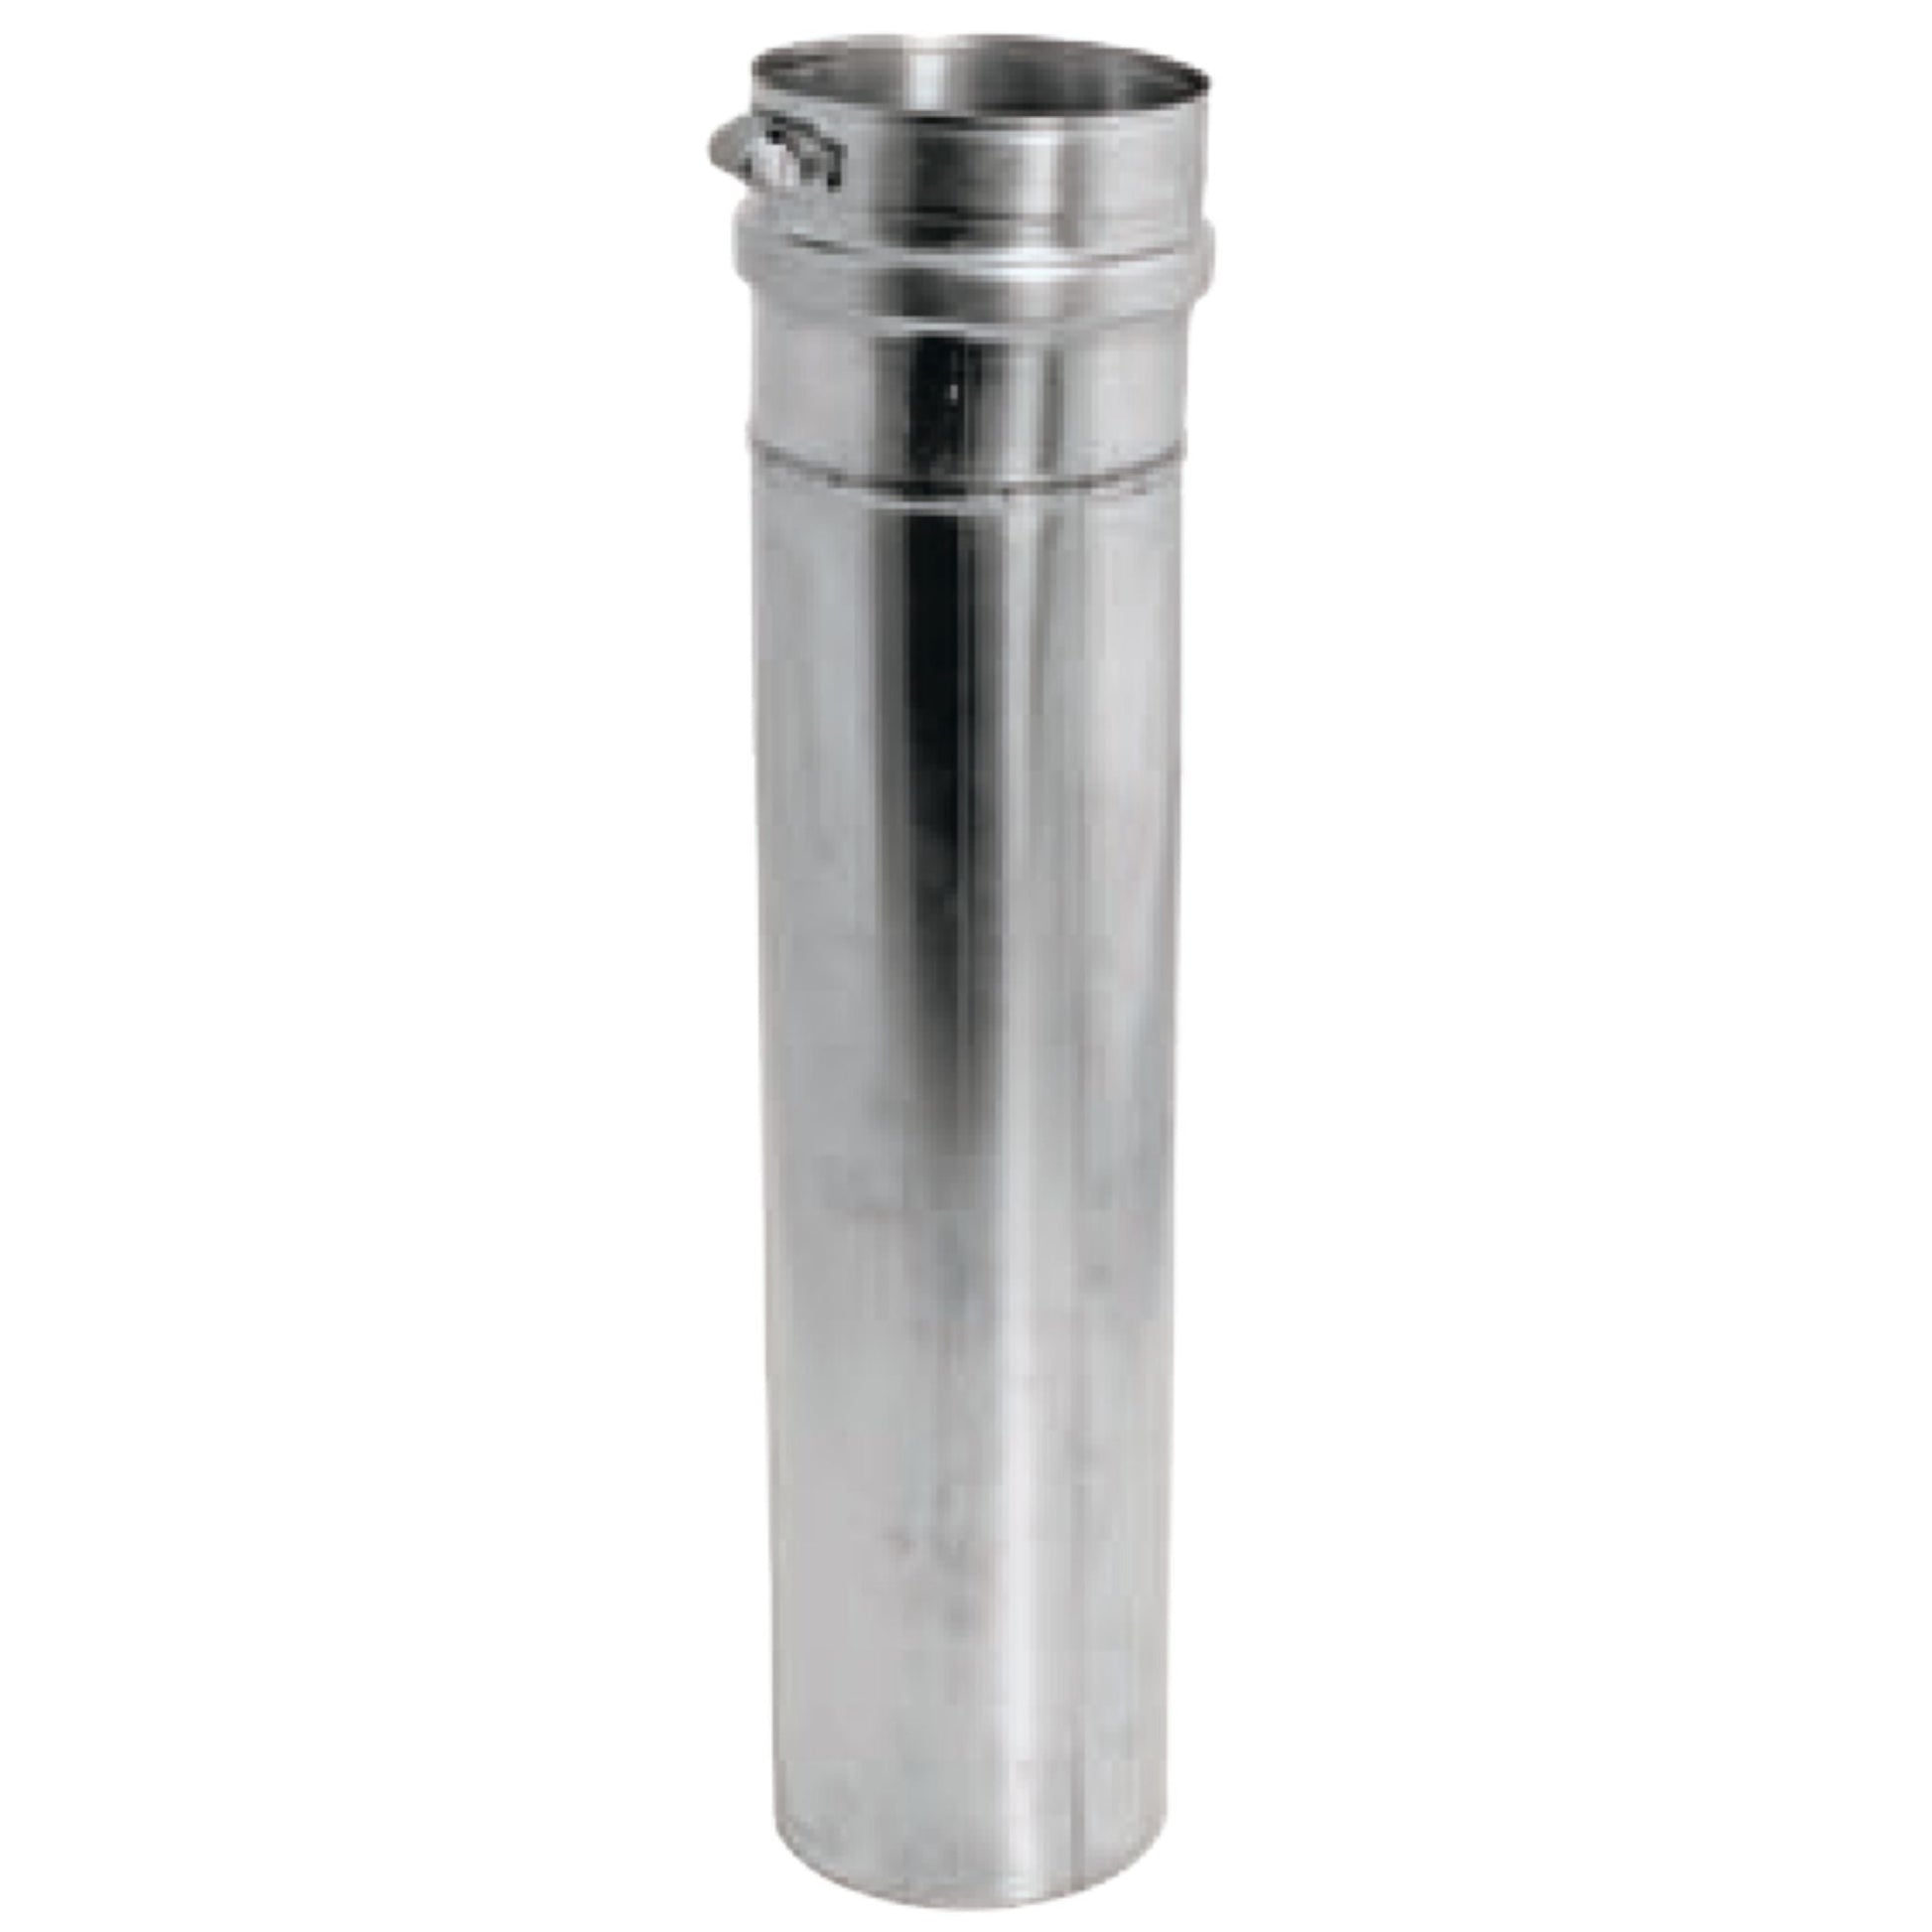 DuraVent FasNSeal 3" 2 Degree 316L Stainless Steel Adjustable Vent Length